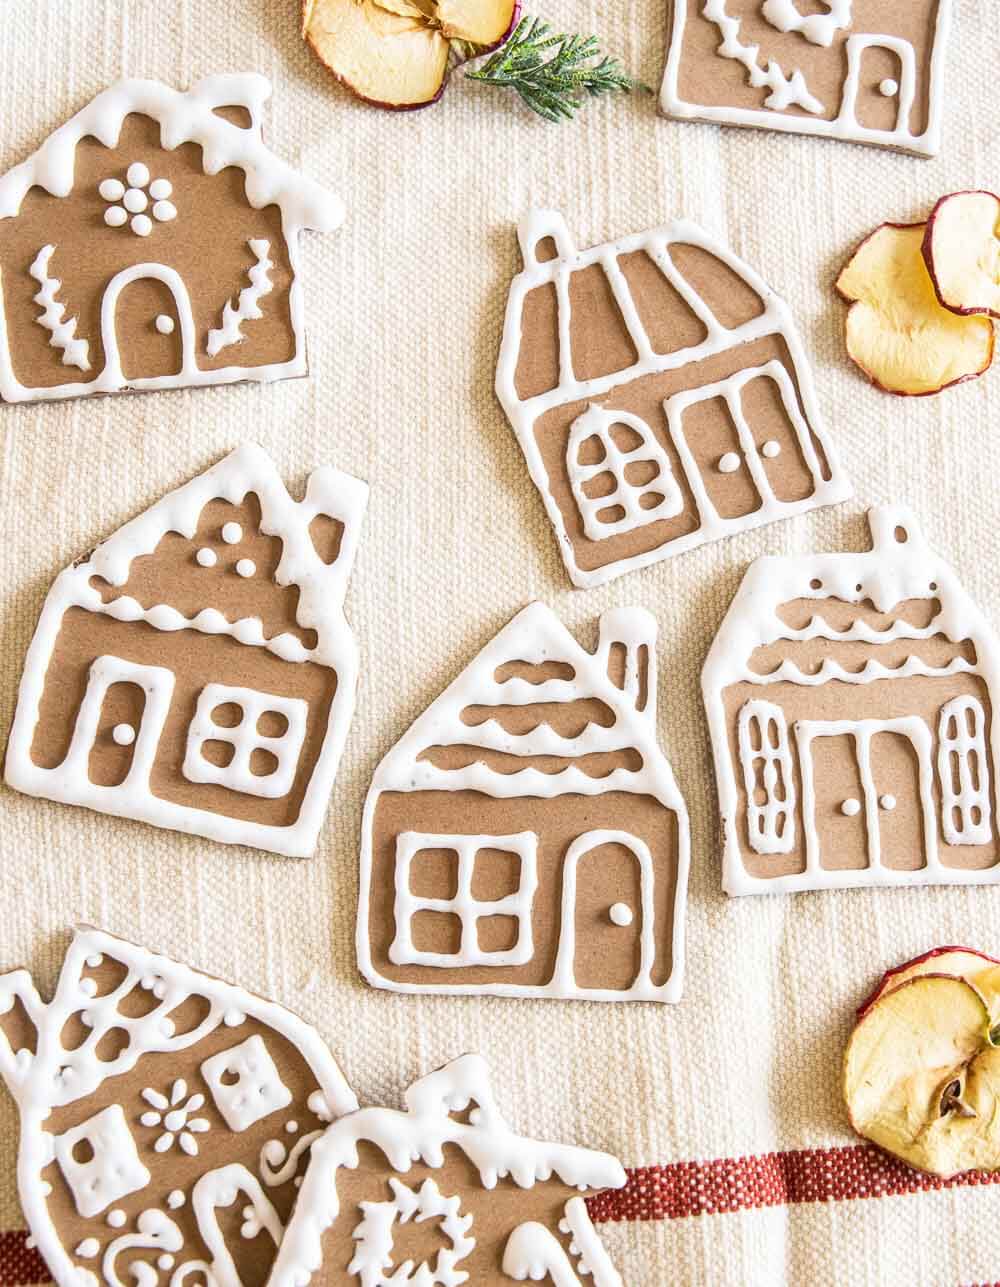 Fake Gingerbread House Ornaments with Homemade Puff Paint